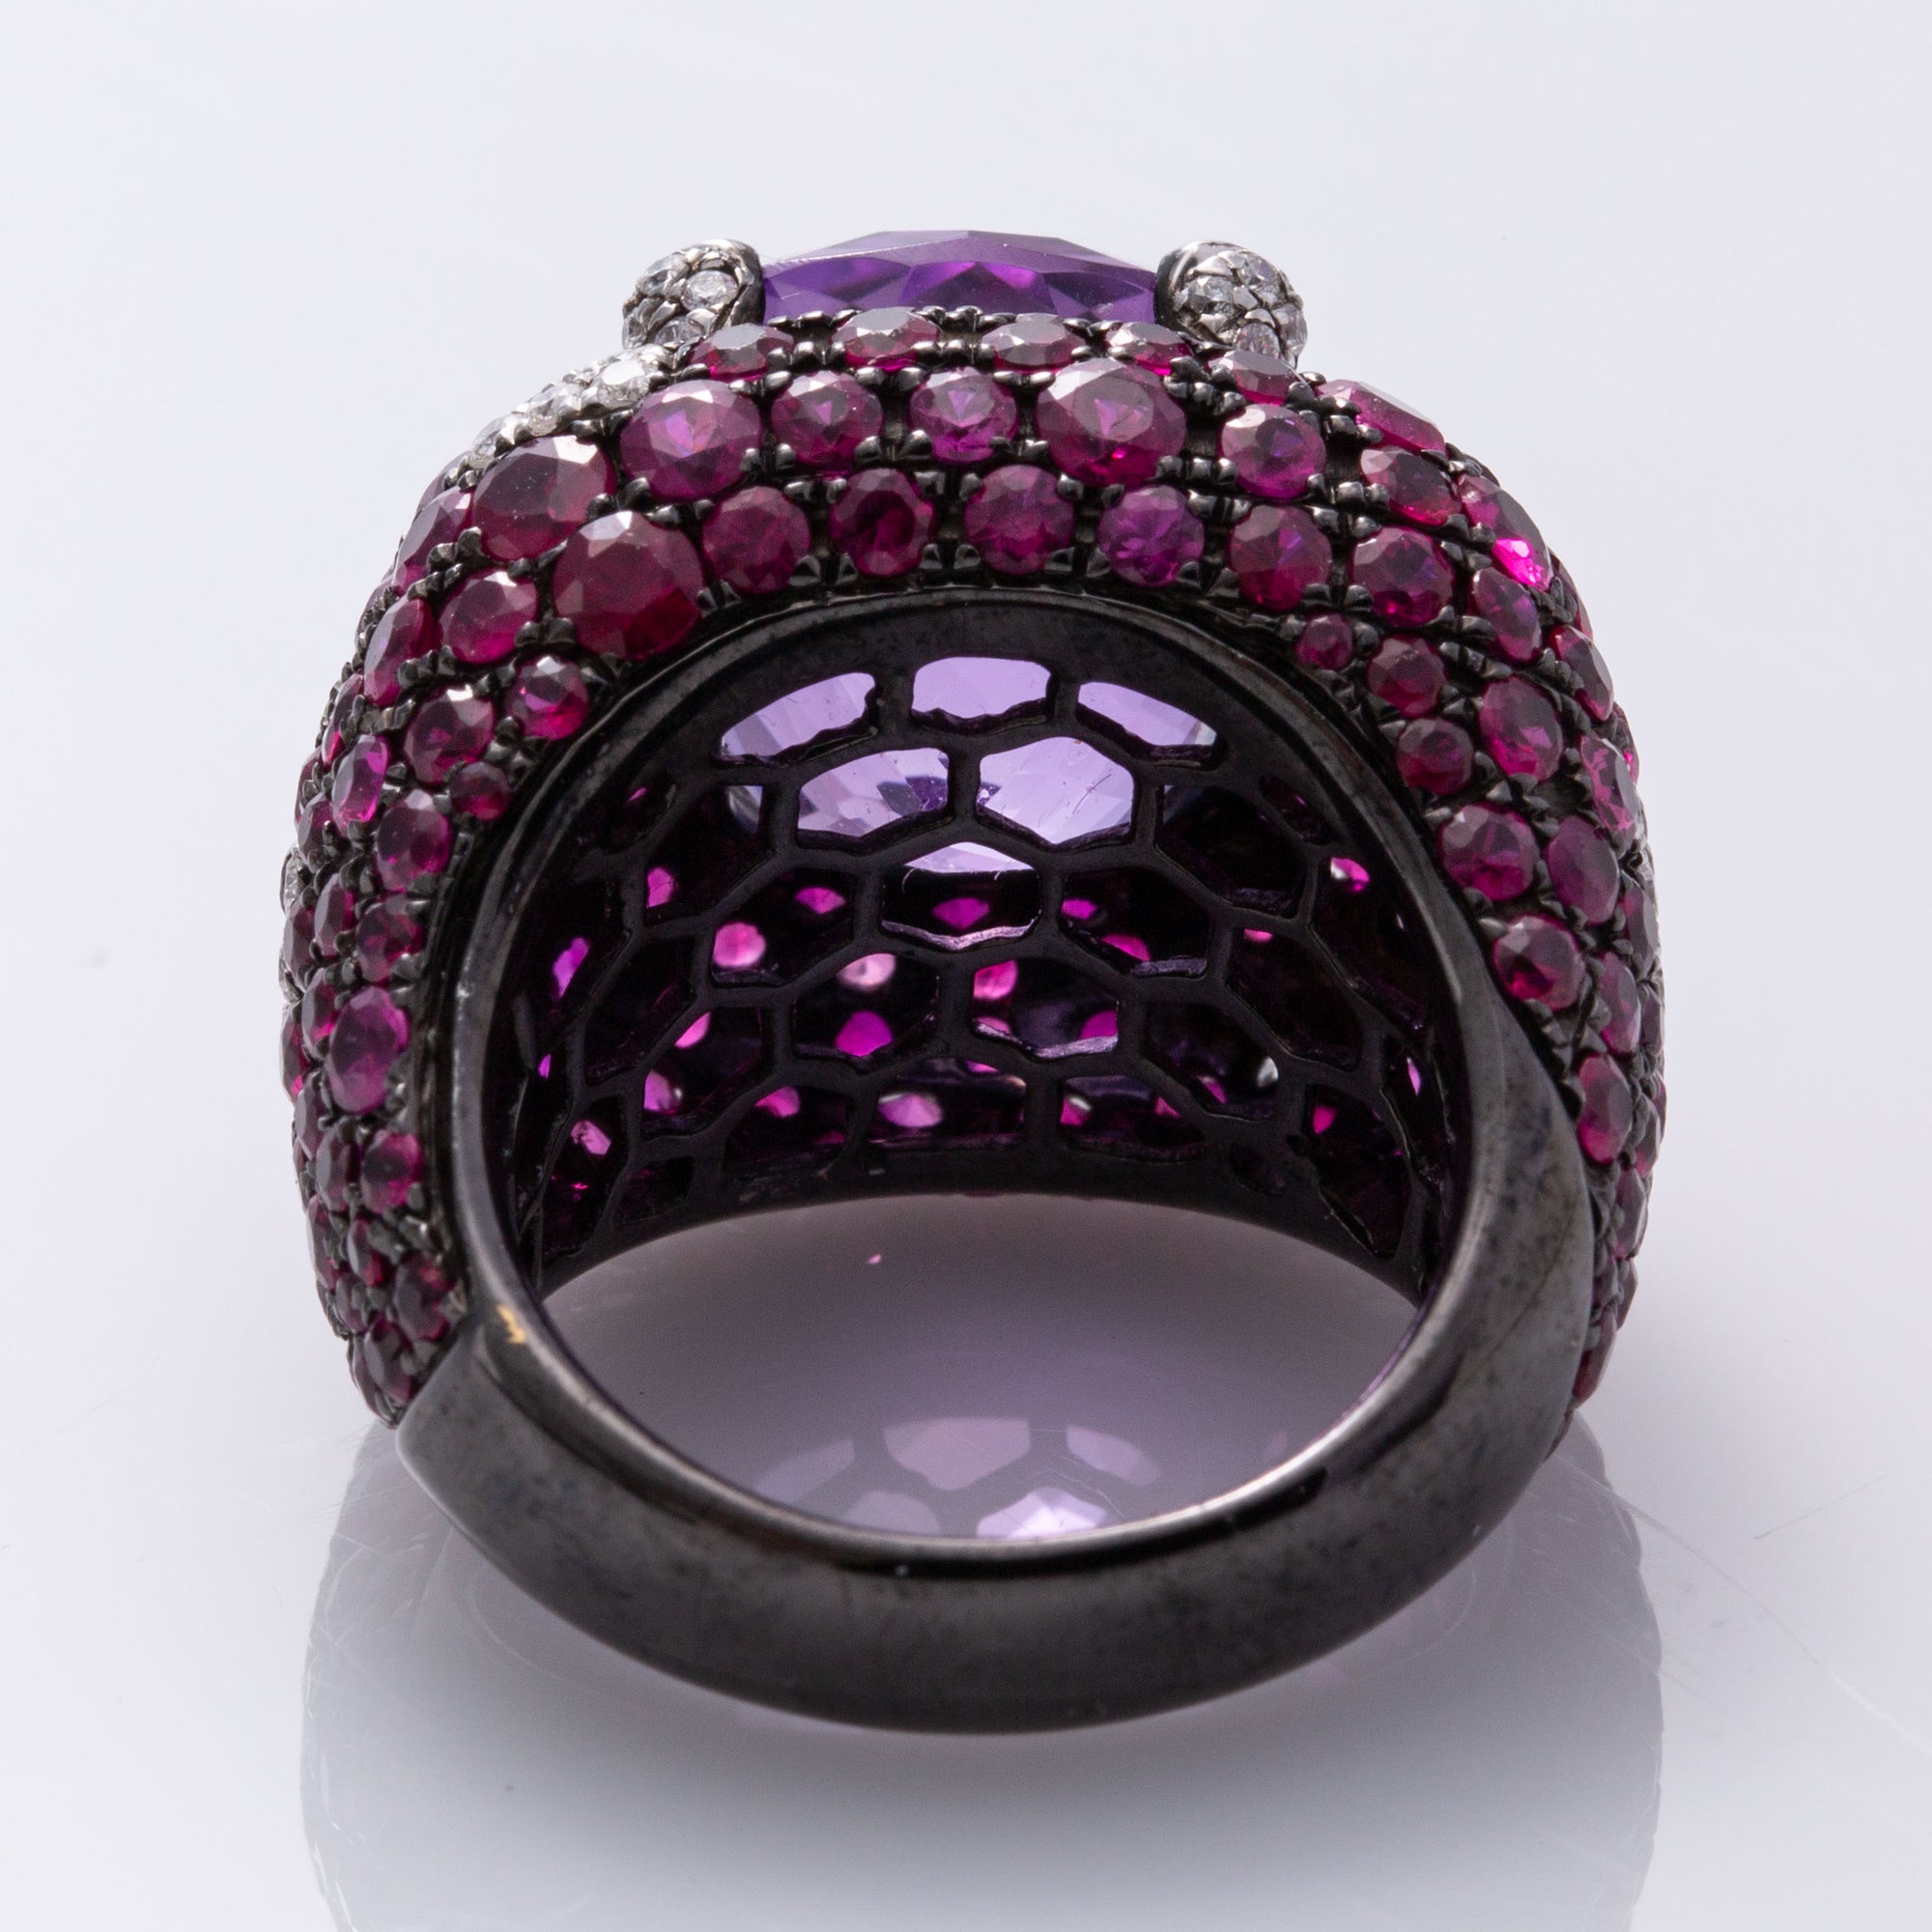 18K White Gold with Black Rhodium Amethyst, Ruby and Diamond Ring | 13.00 ct, 7.50 ctw, 0.33 ctw | SZ 6.5 |